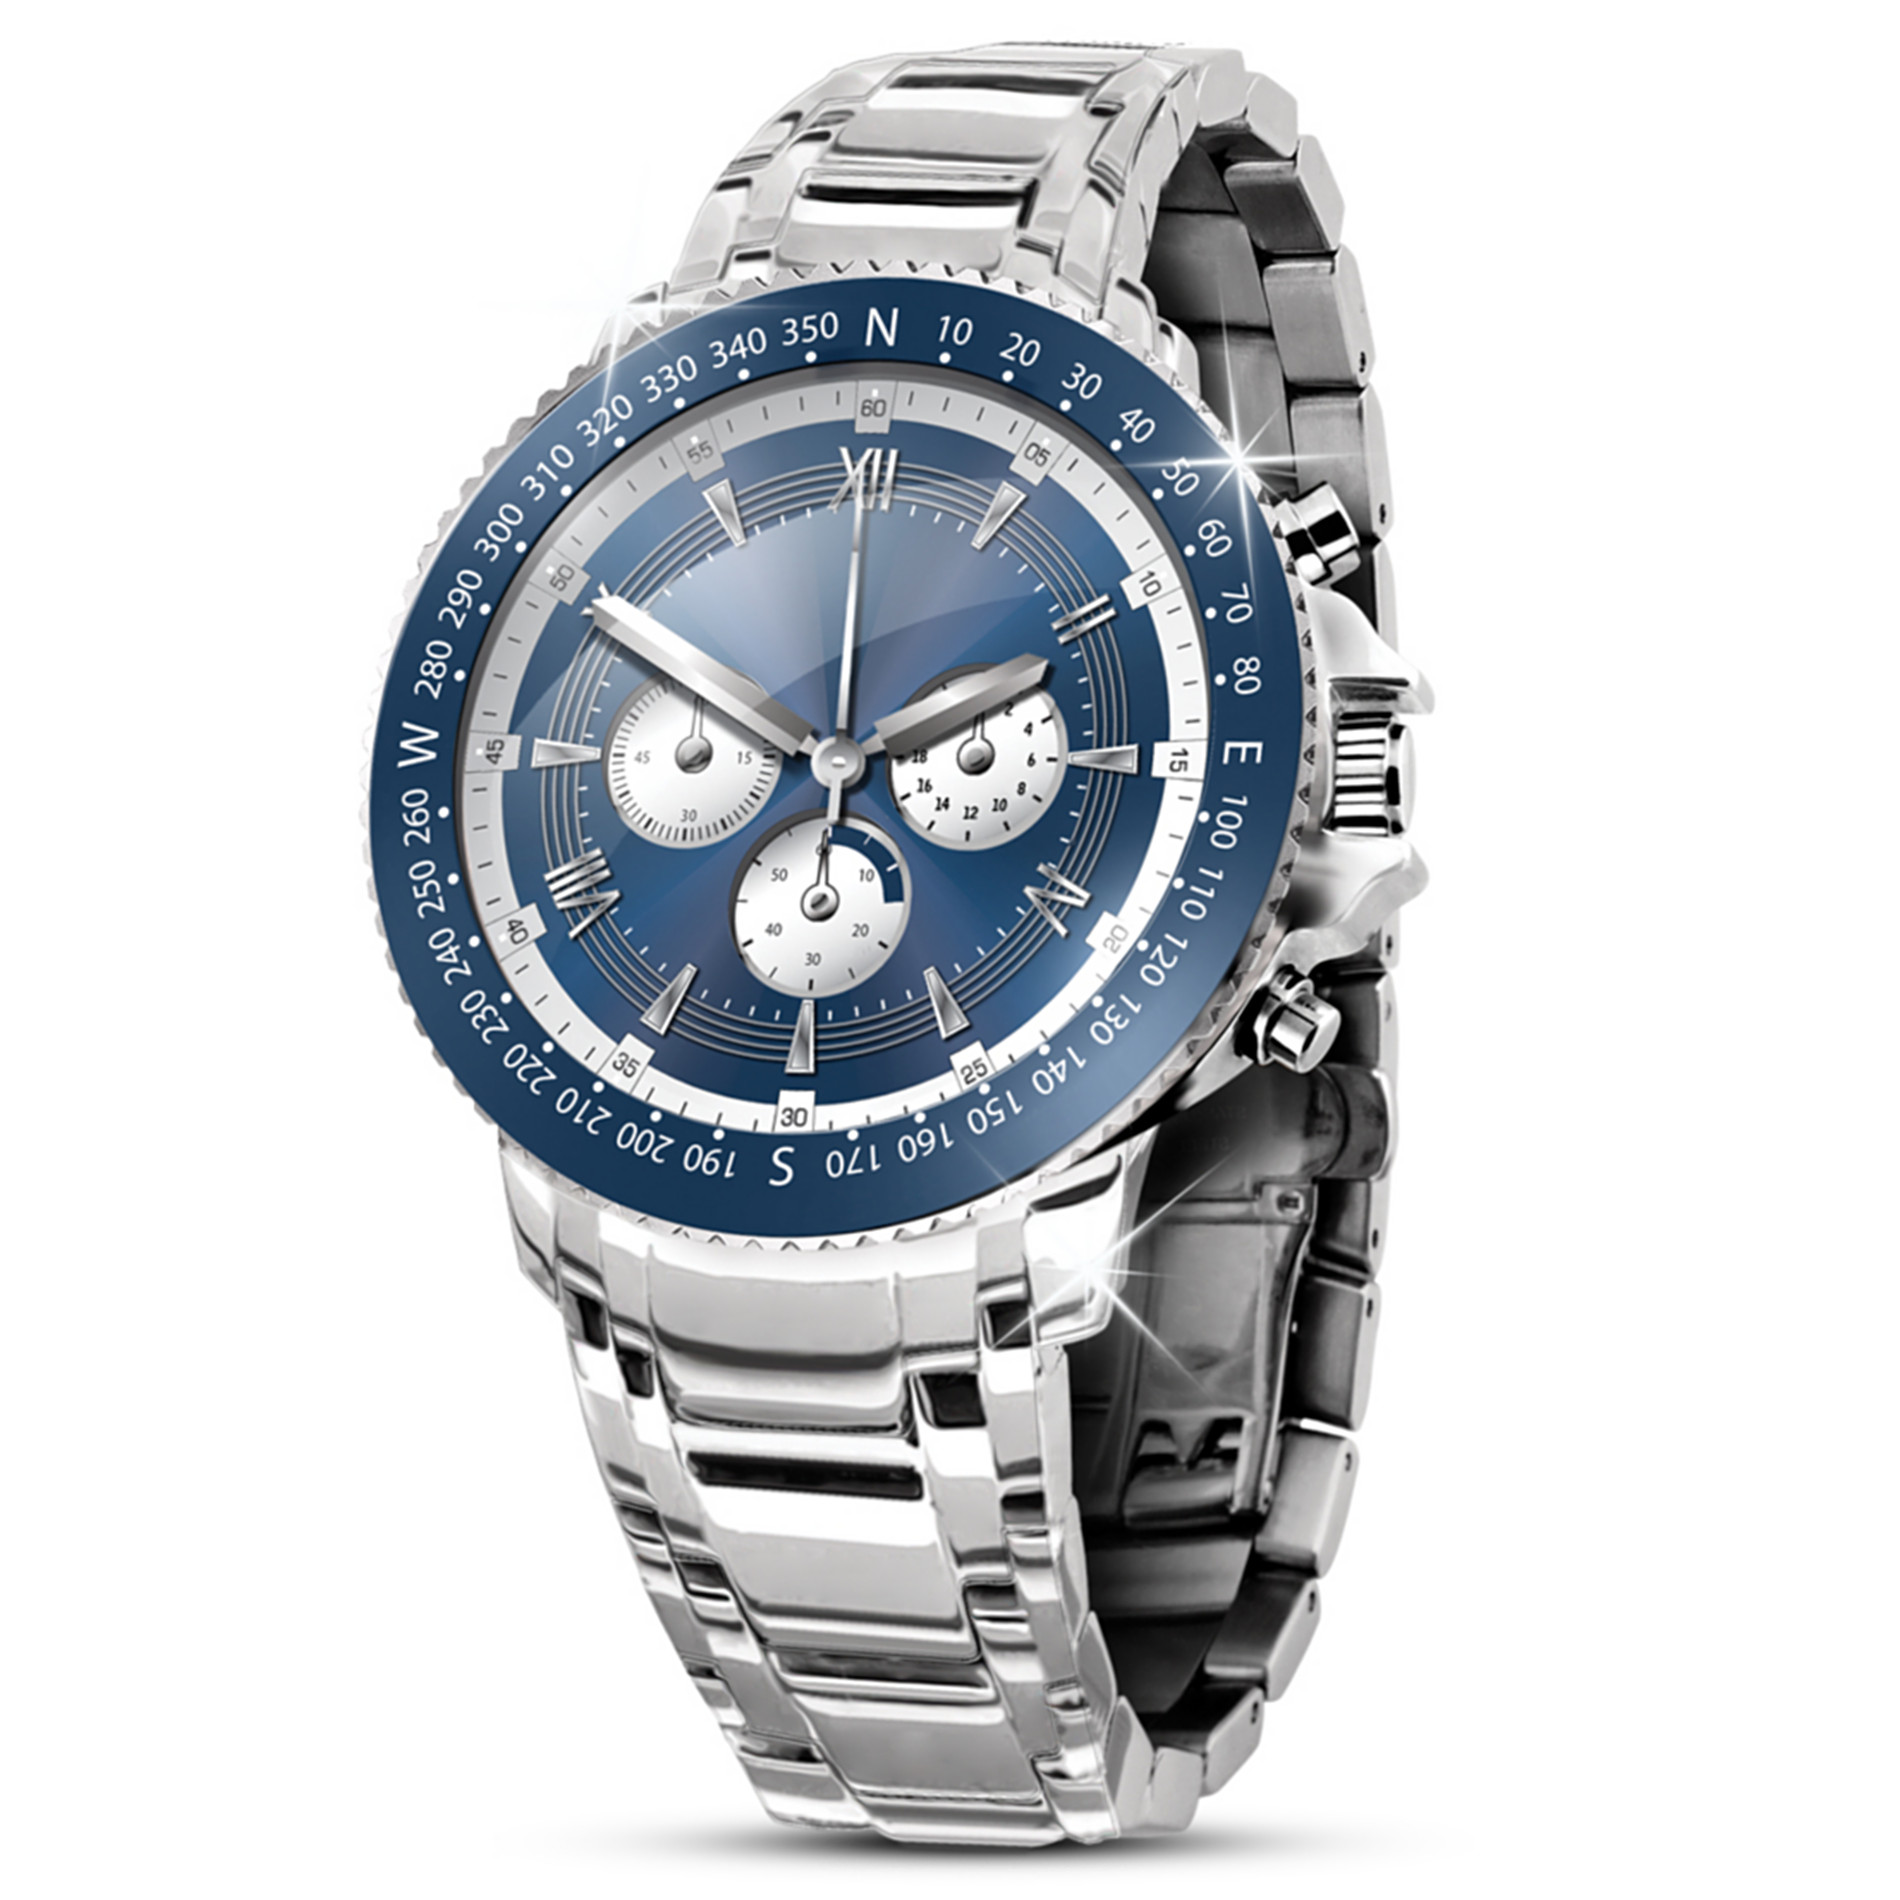 ... Men's Watch: Son, Reach For Your Dreams Men's Watch at Sears.com